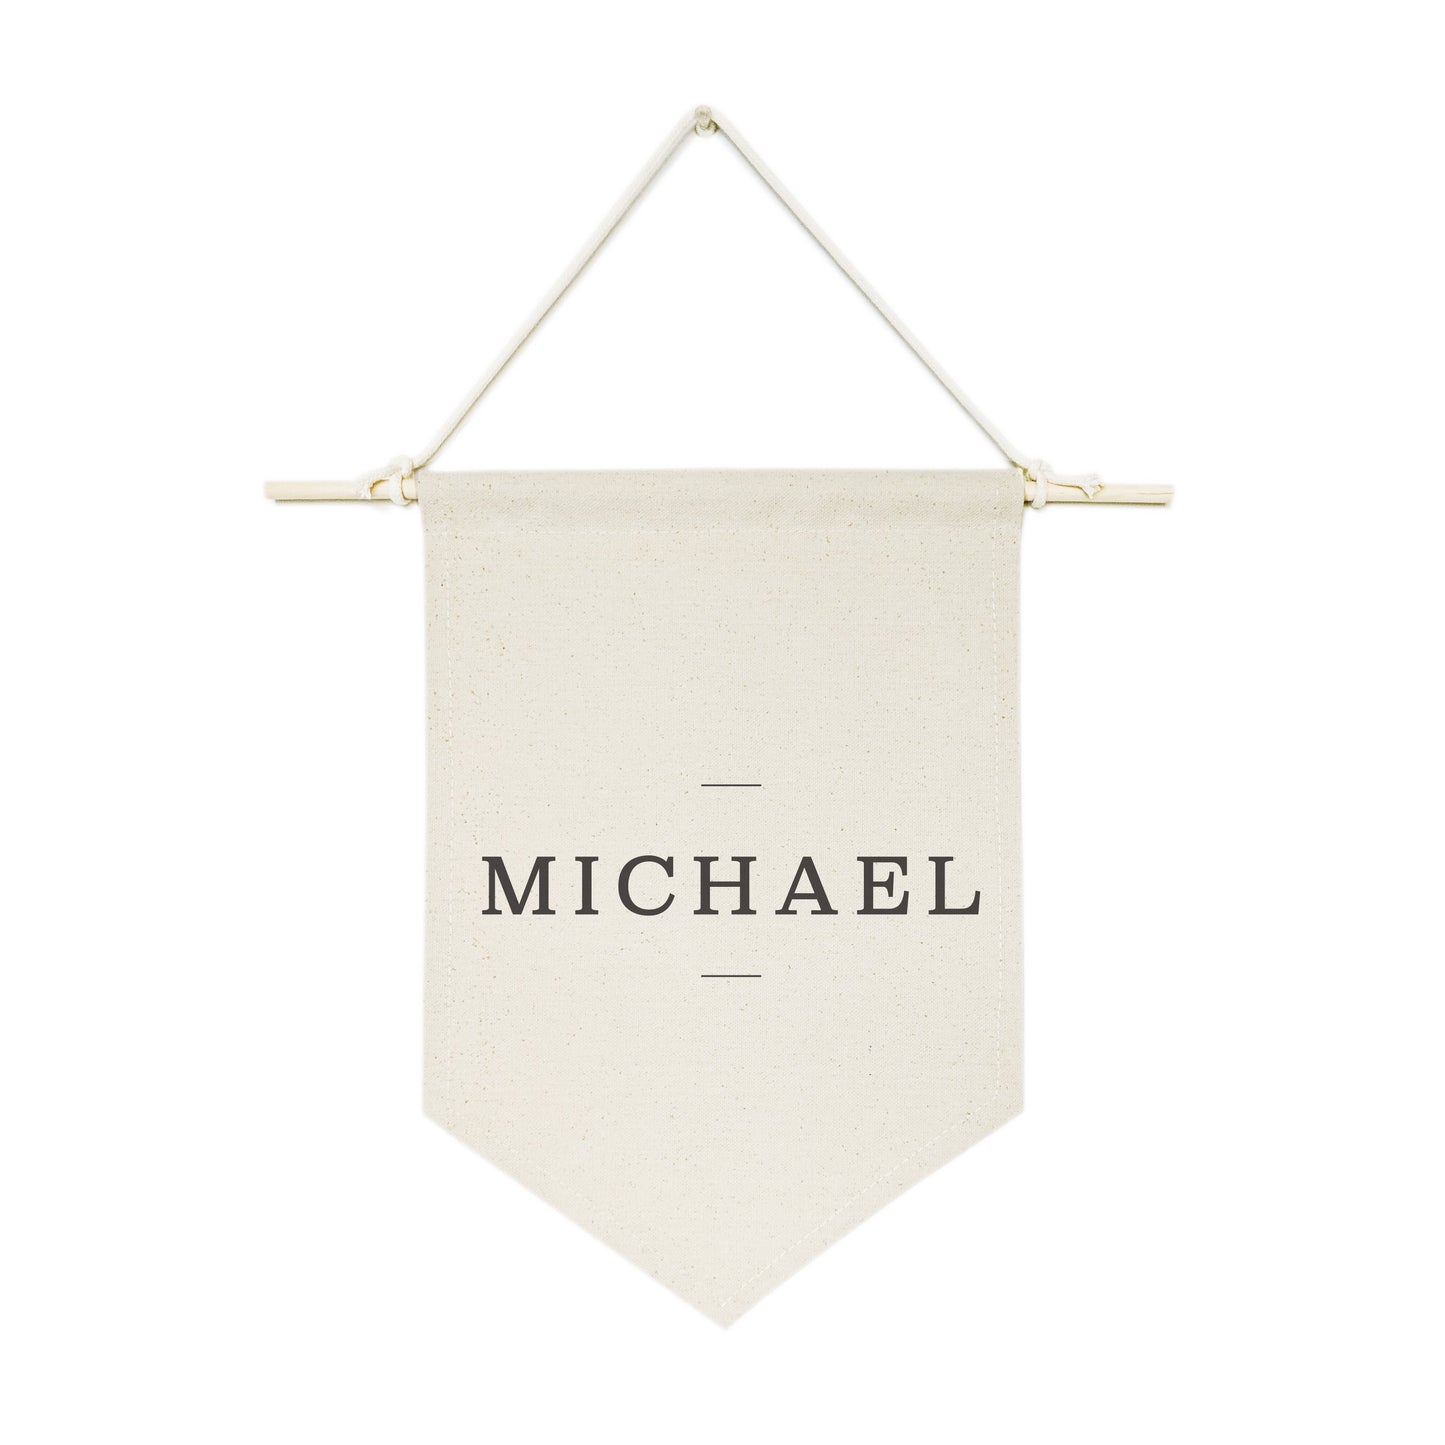 Personalized Modern Hanging Banner